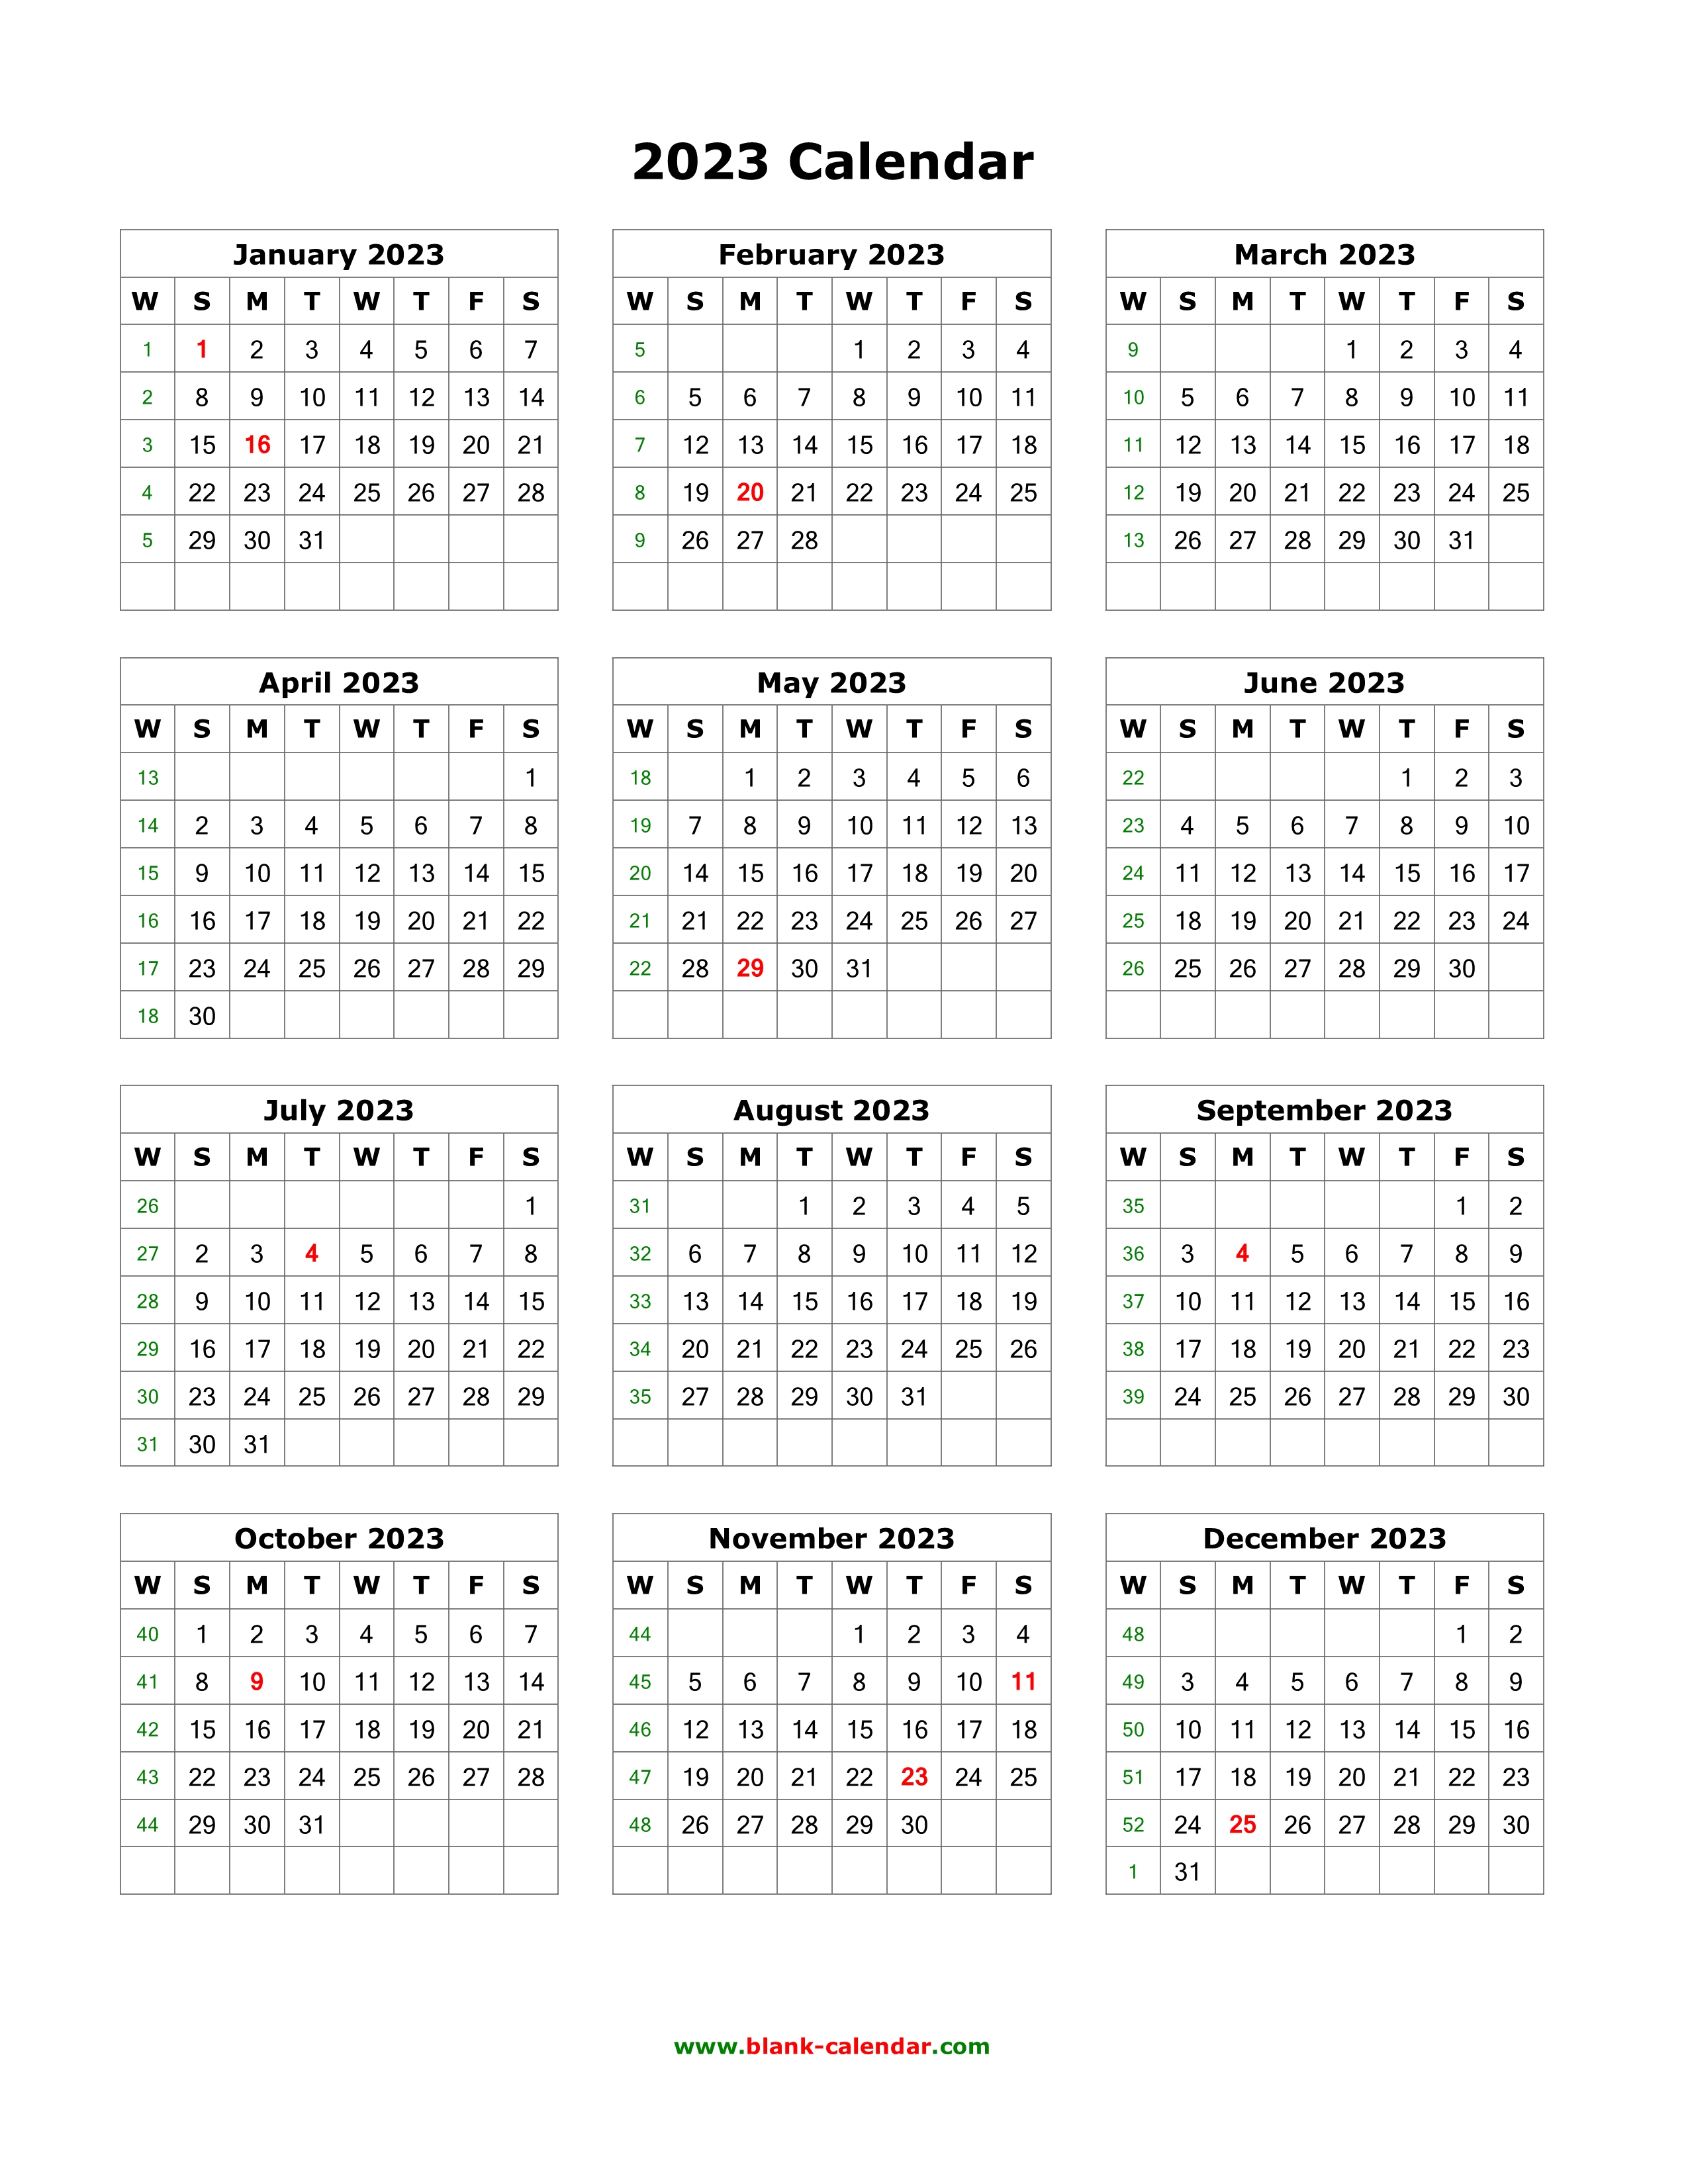 Download Blank Calendar 2023 (12 months on one page, vertical)